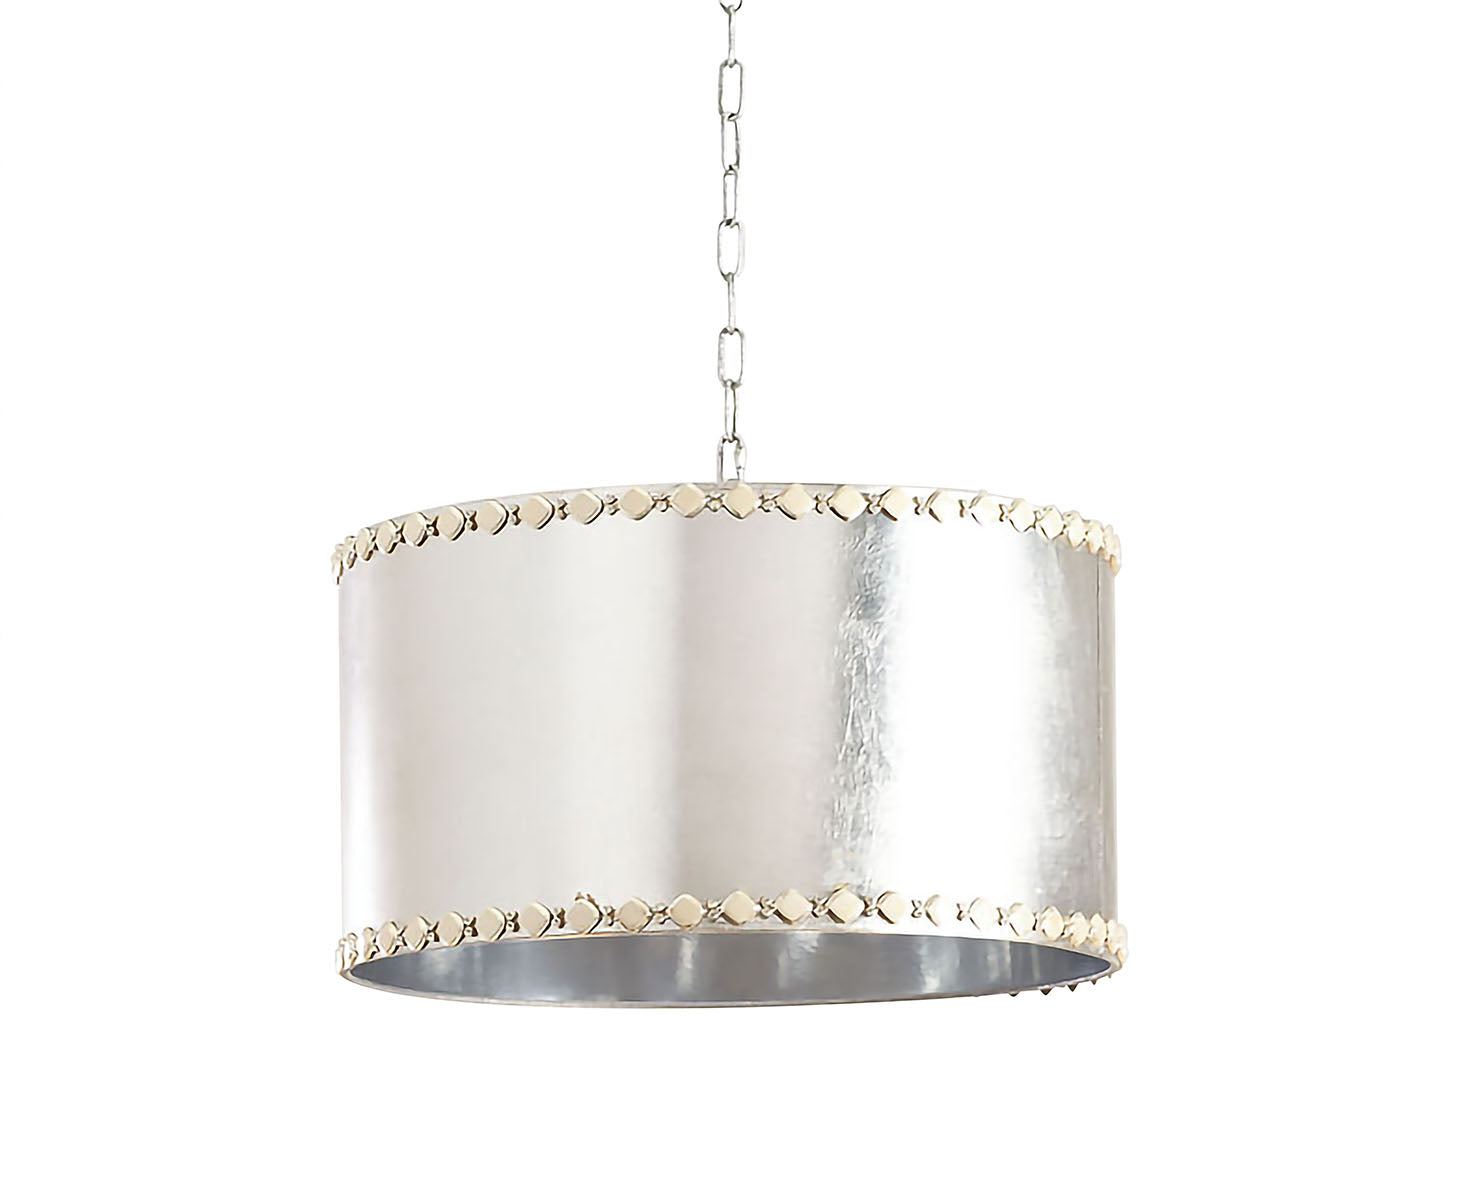 3 Light Pendant - Silver - NEW - Couture Lamps